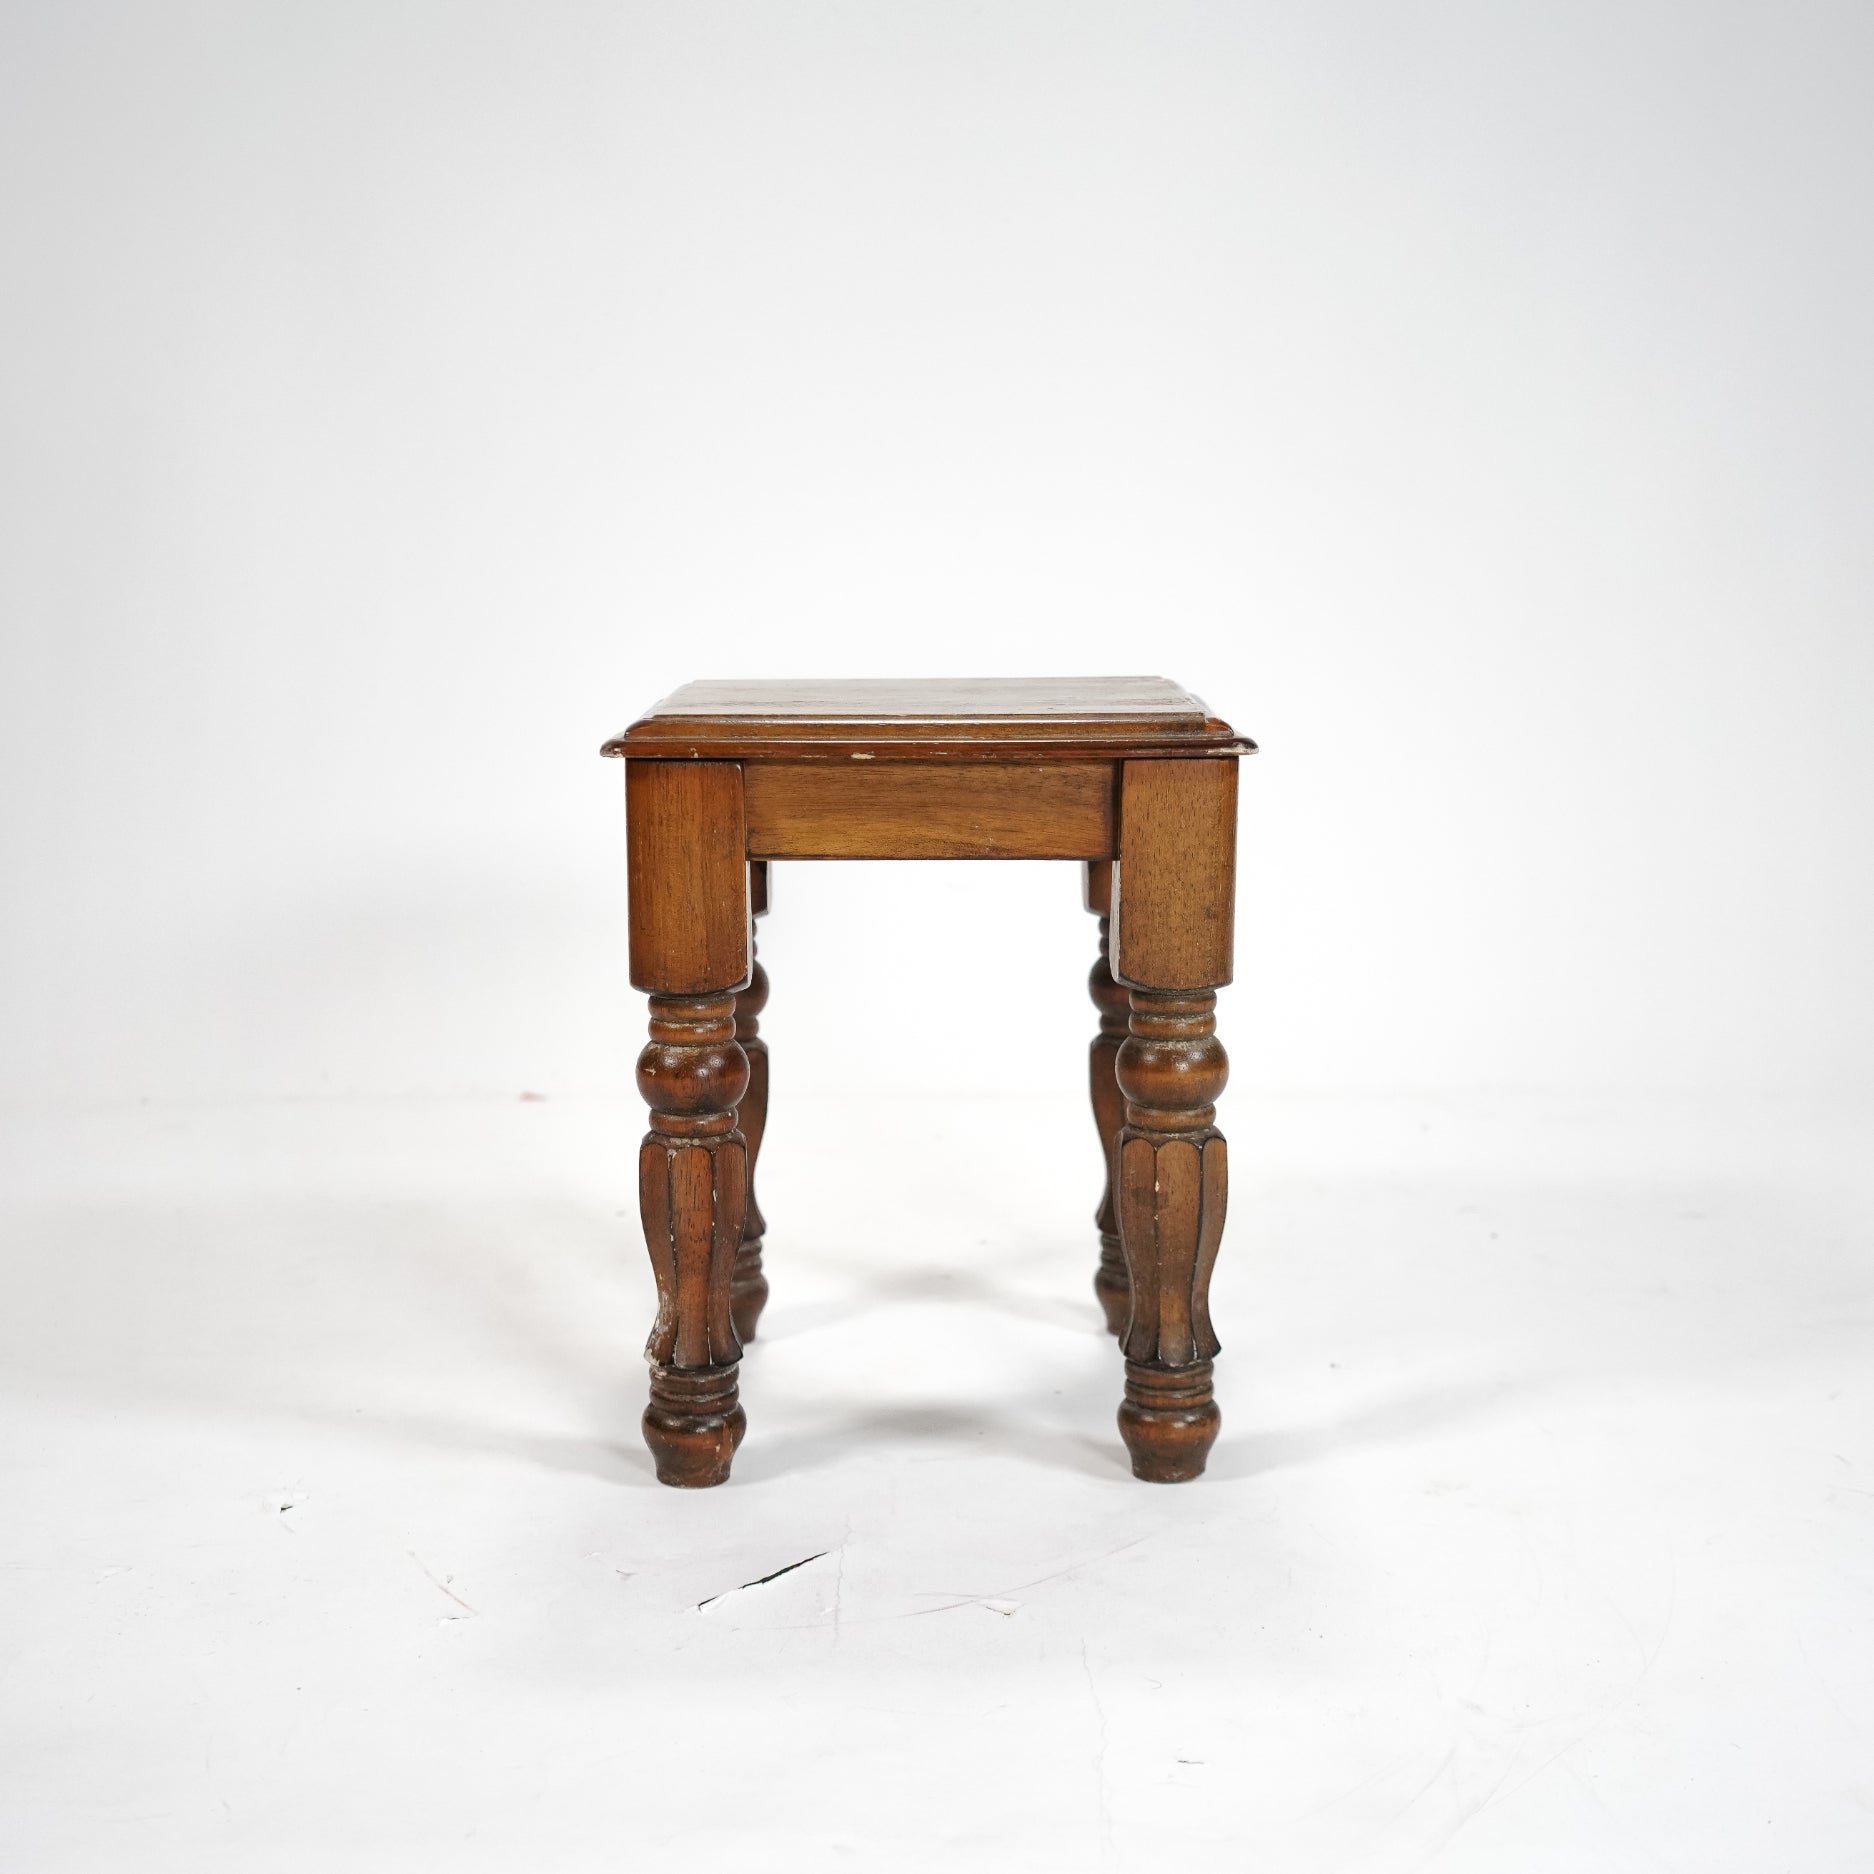 Pair of Wooden Side Tables - Sirdab - Unknown